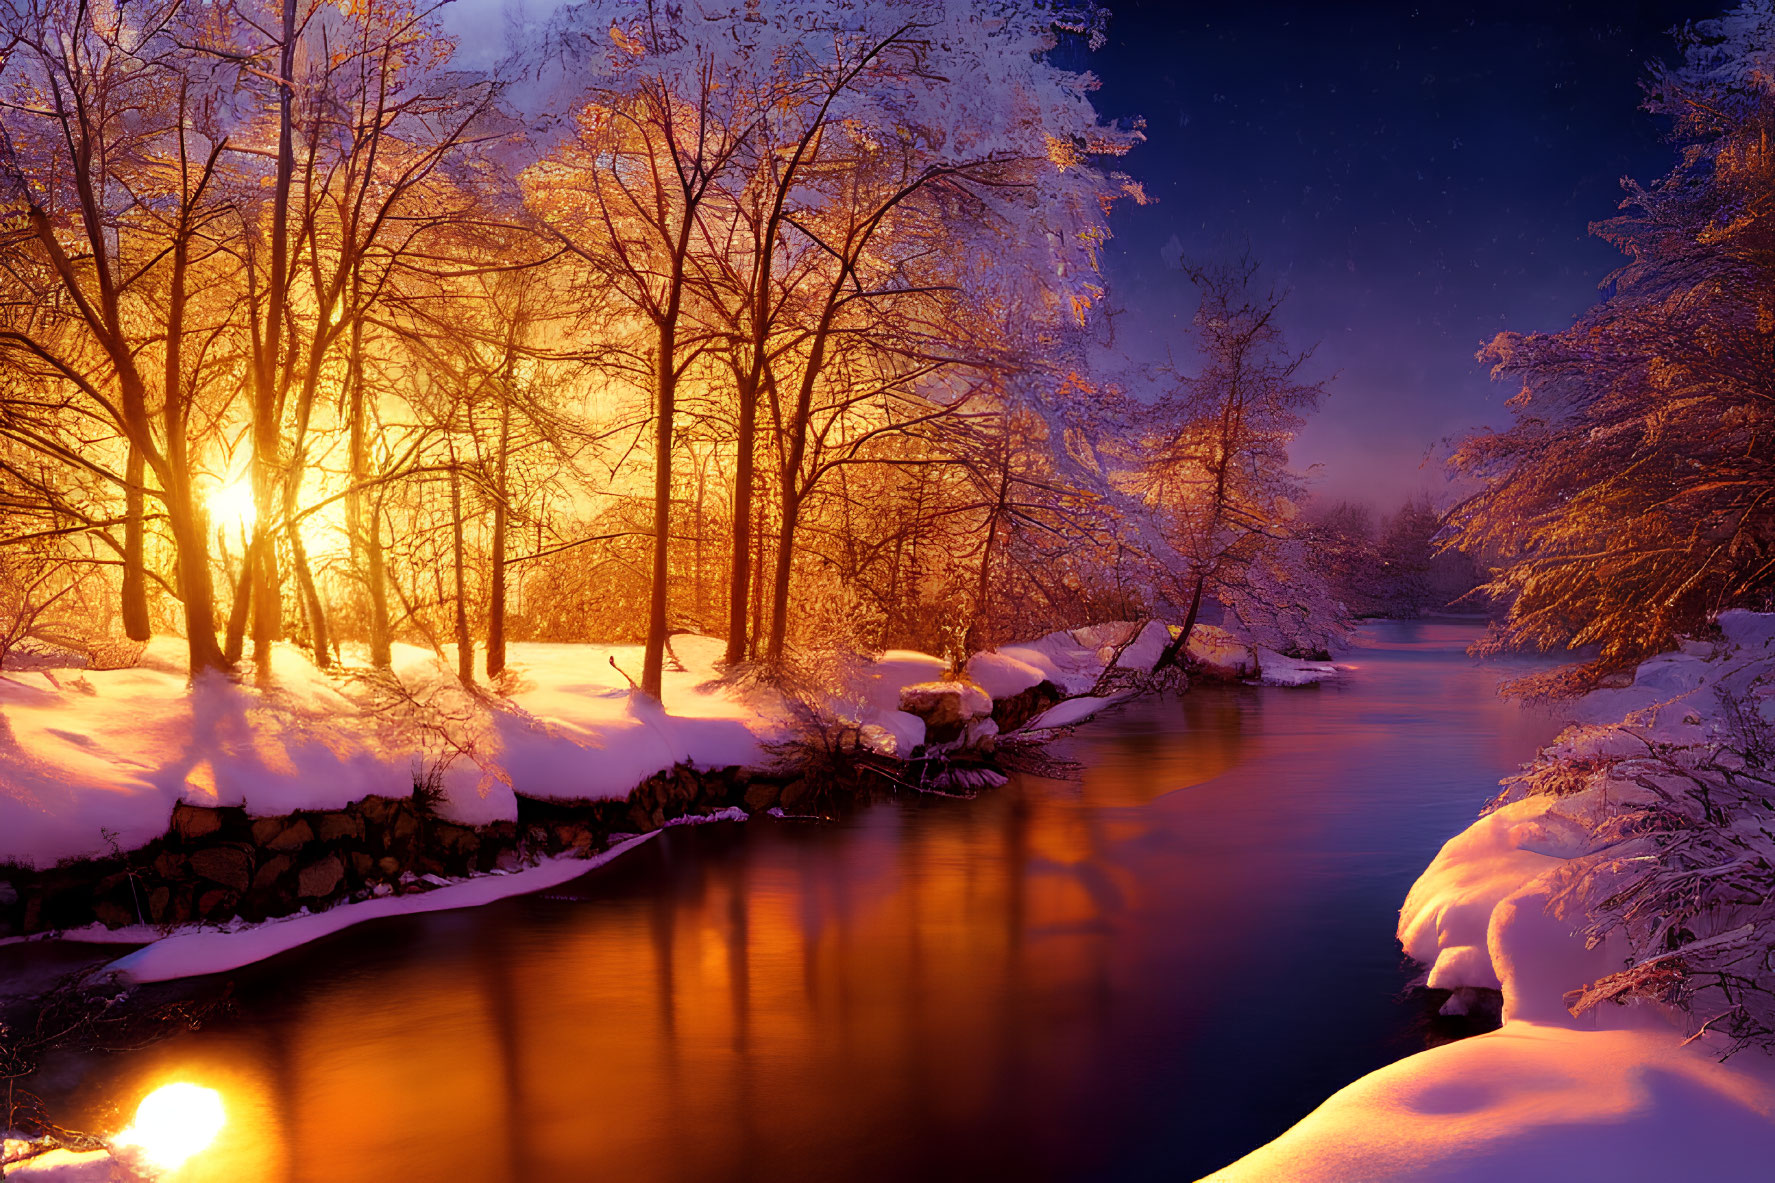 Snow-covered trees and gentle stream in serene winter scene